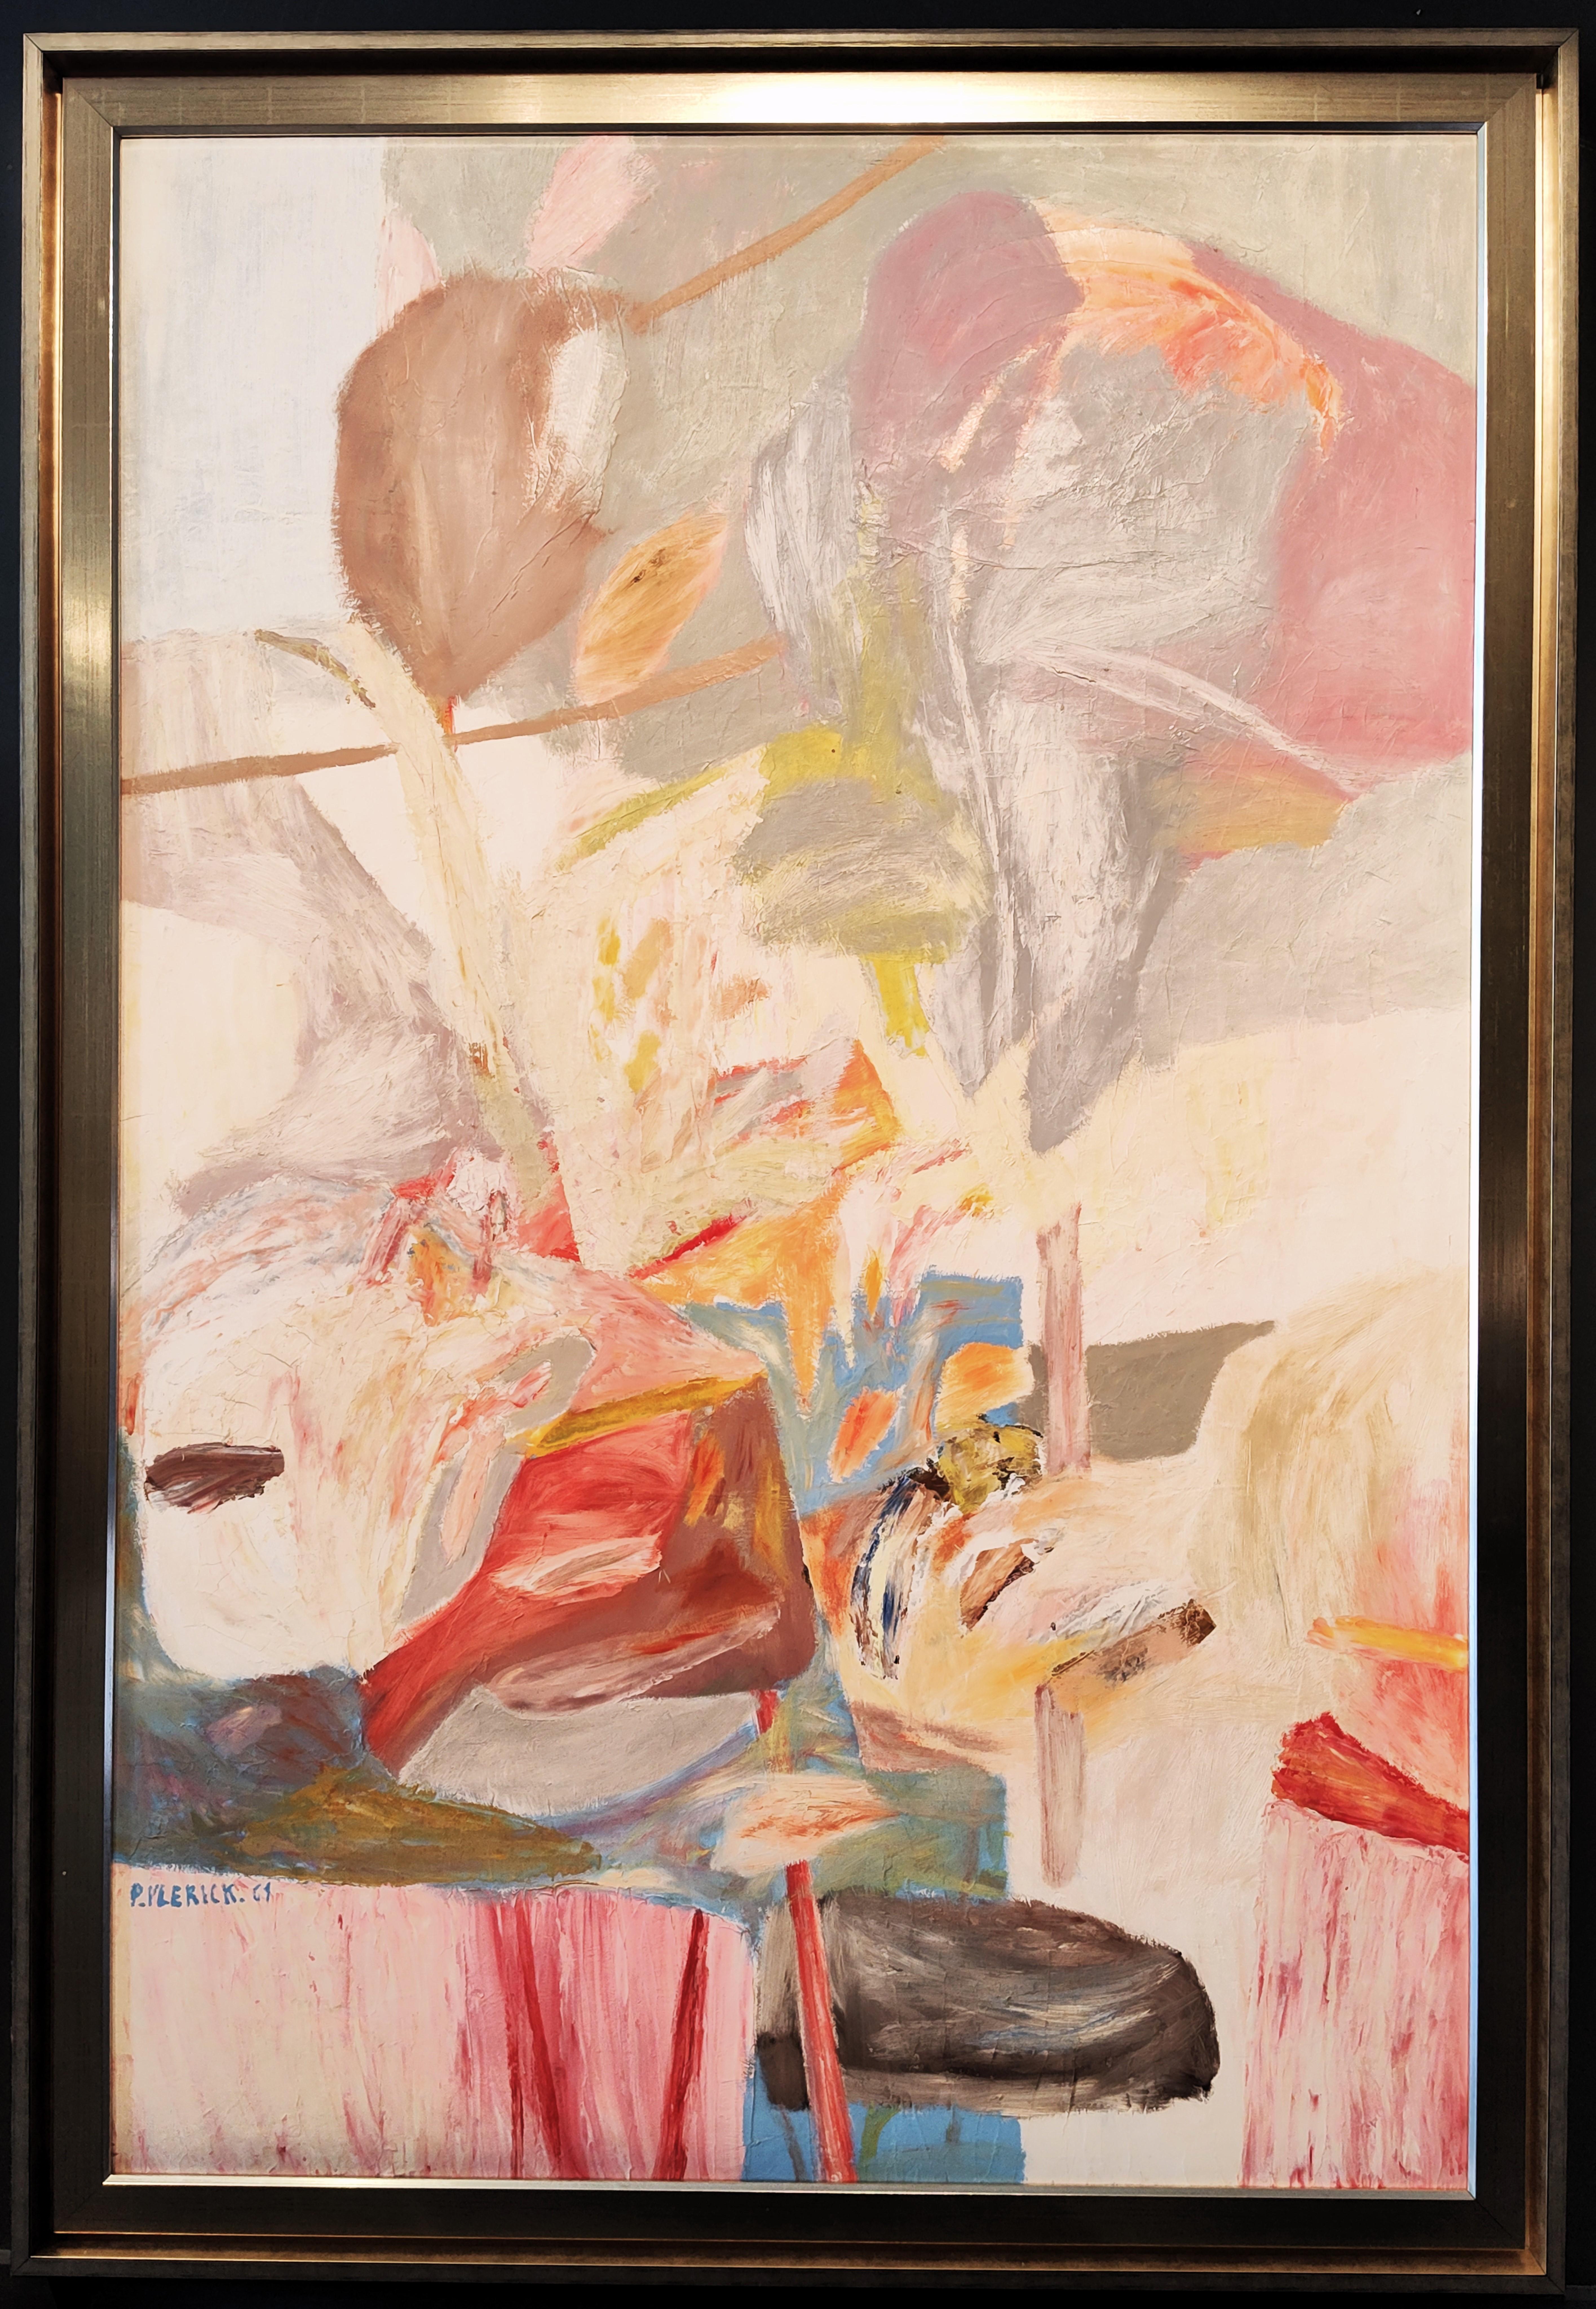 This painting is a perfect example of lyrical abstraction and a choice painting out of the best period of Vlerick's career.

Pierre Vlerick’s work shows some resemblance to Willem de Kooning’s. While the Dutch American was famous for the wild manner